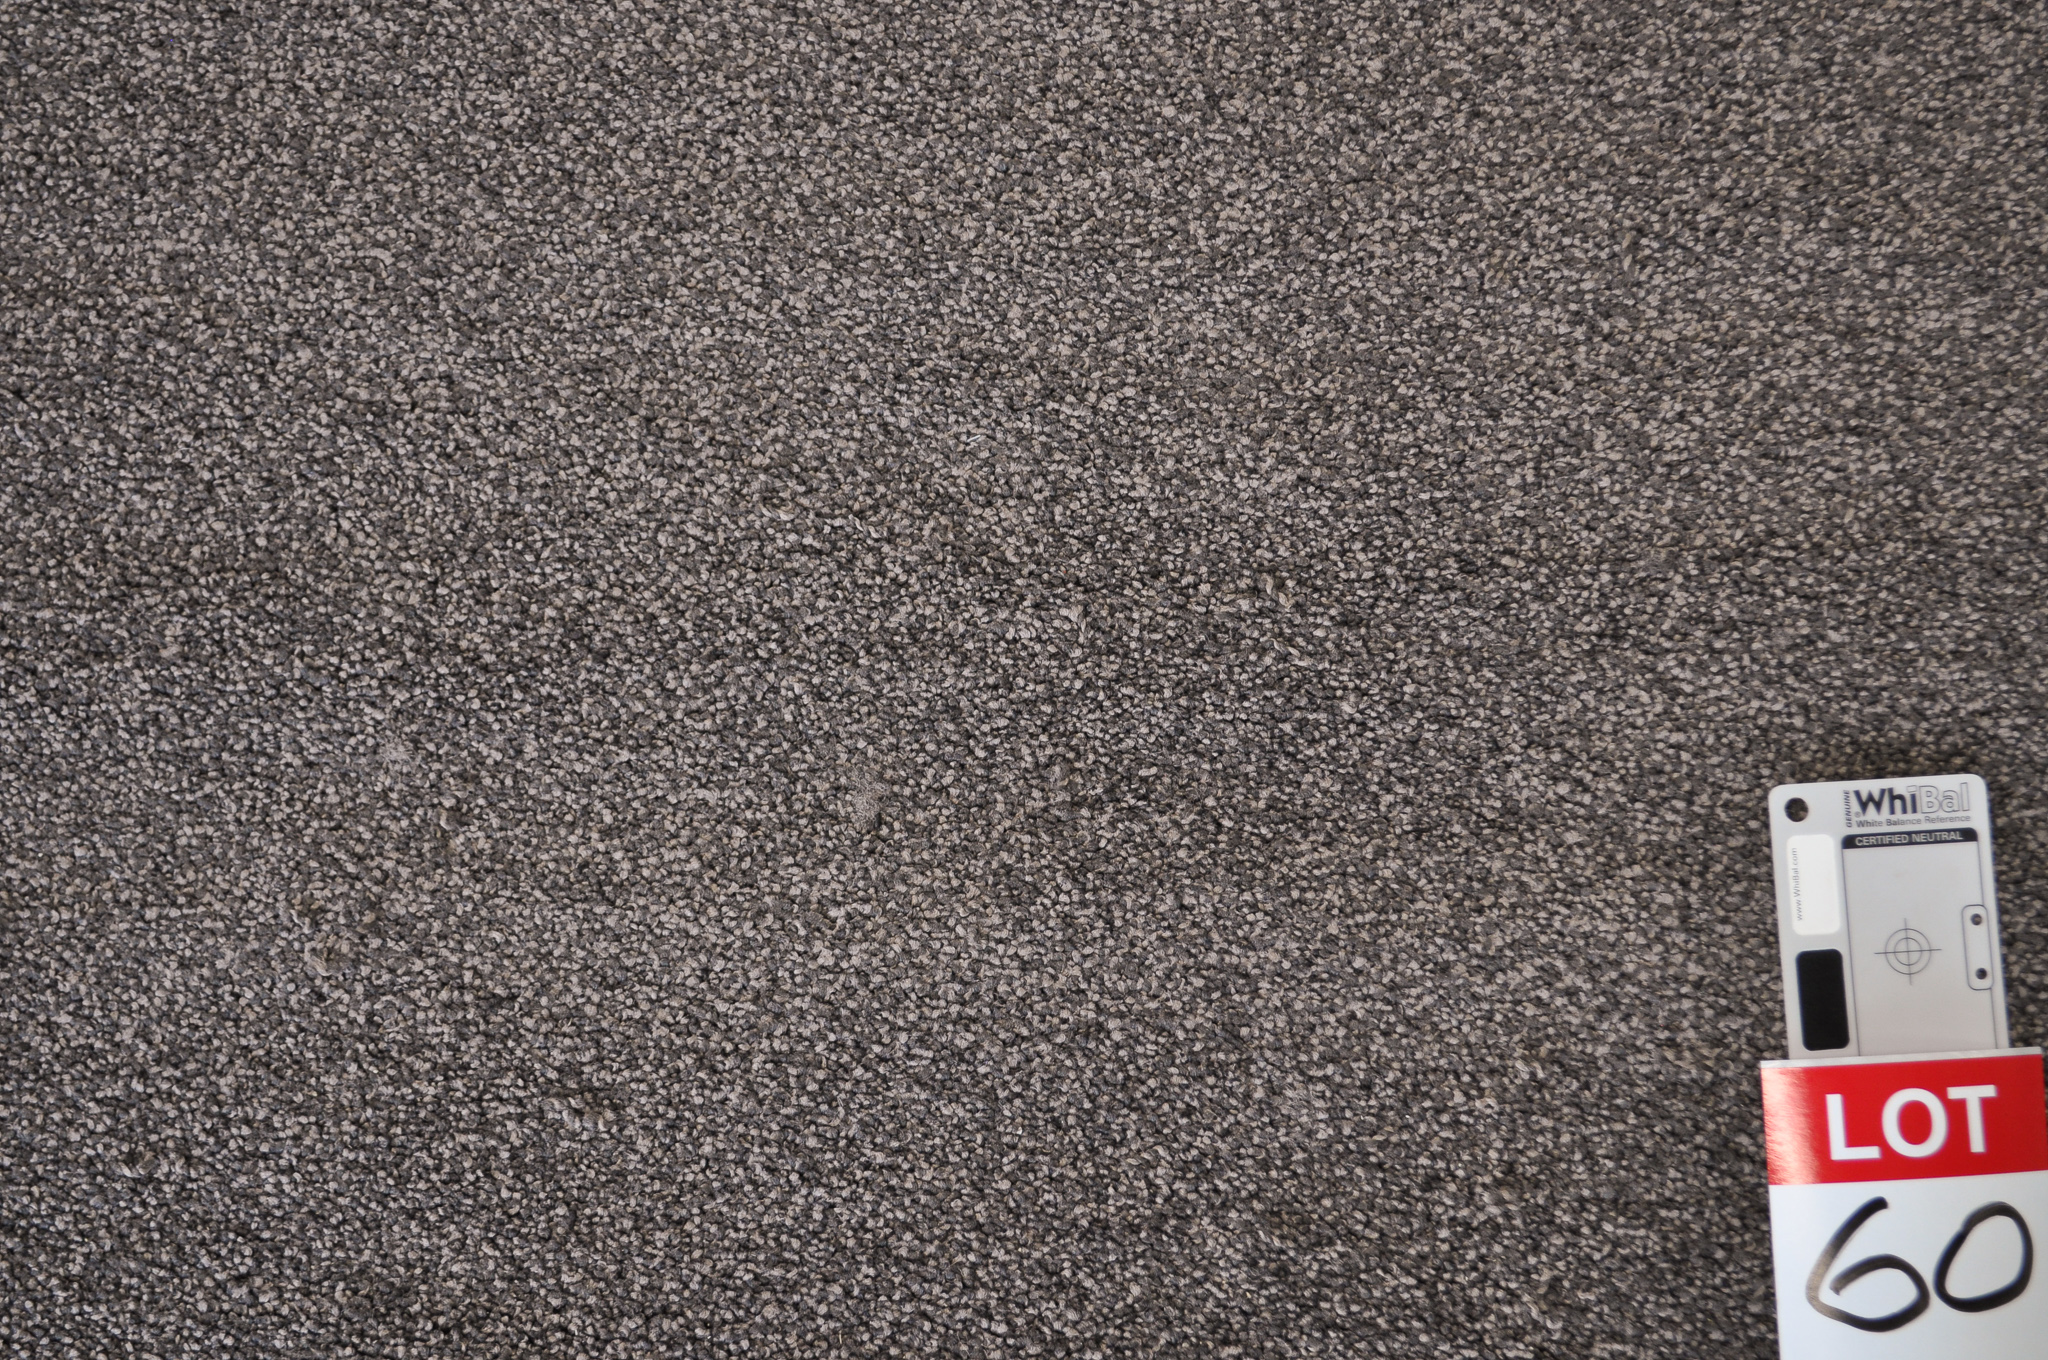 dark grey colored, nylon twist pile roll of carpet on sale at Concord Floors, it being a remnant roll in Concord Floor's warehouse.